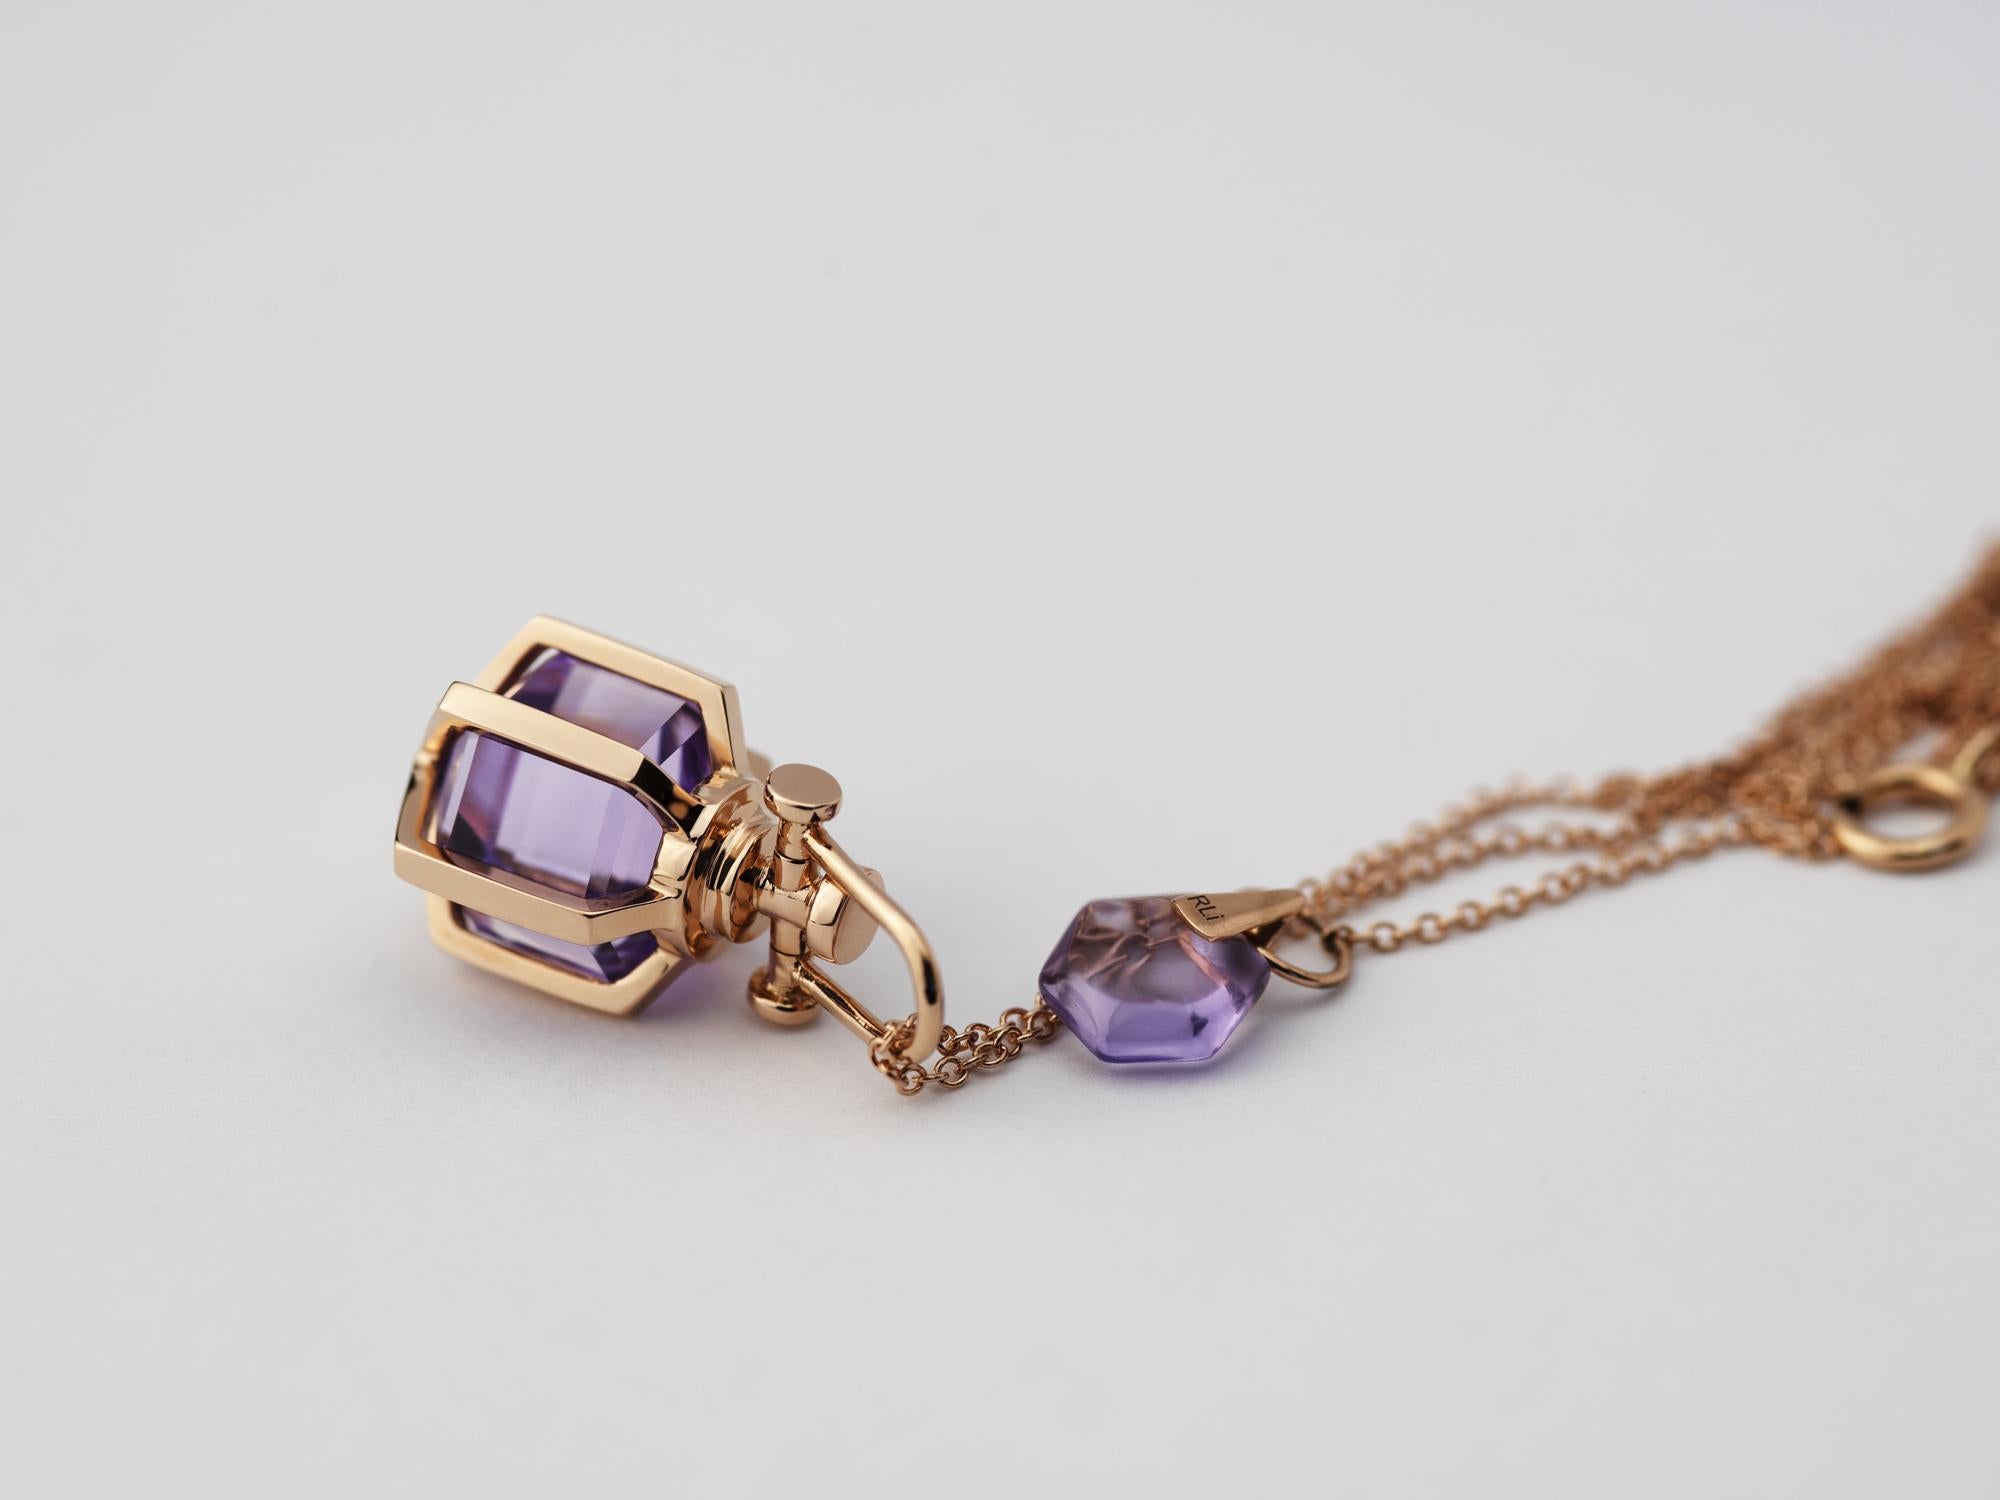 Rebecca Li designs mindfulness.
This sacred hexagon inspired necklace  signifies our intuition.
Amethyst means Intuition, Creativity & Awakening.

Talisman Pendant :
18K Rose Gold
Natural Amethyst
Pendant Size: 9 mm W * 9 mm D * 18 mm H
Gemstone